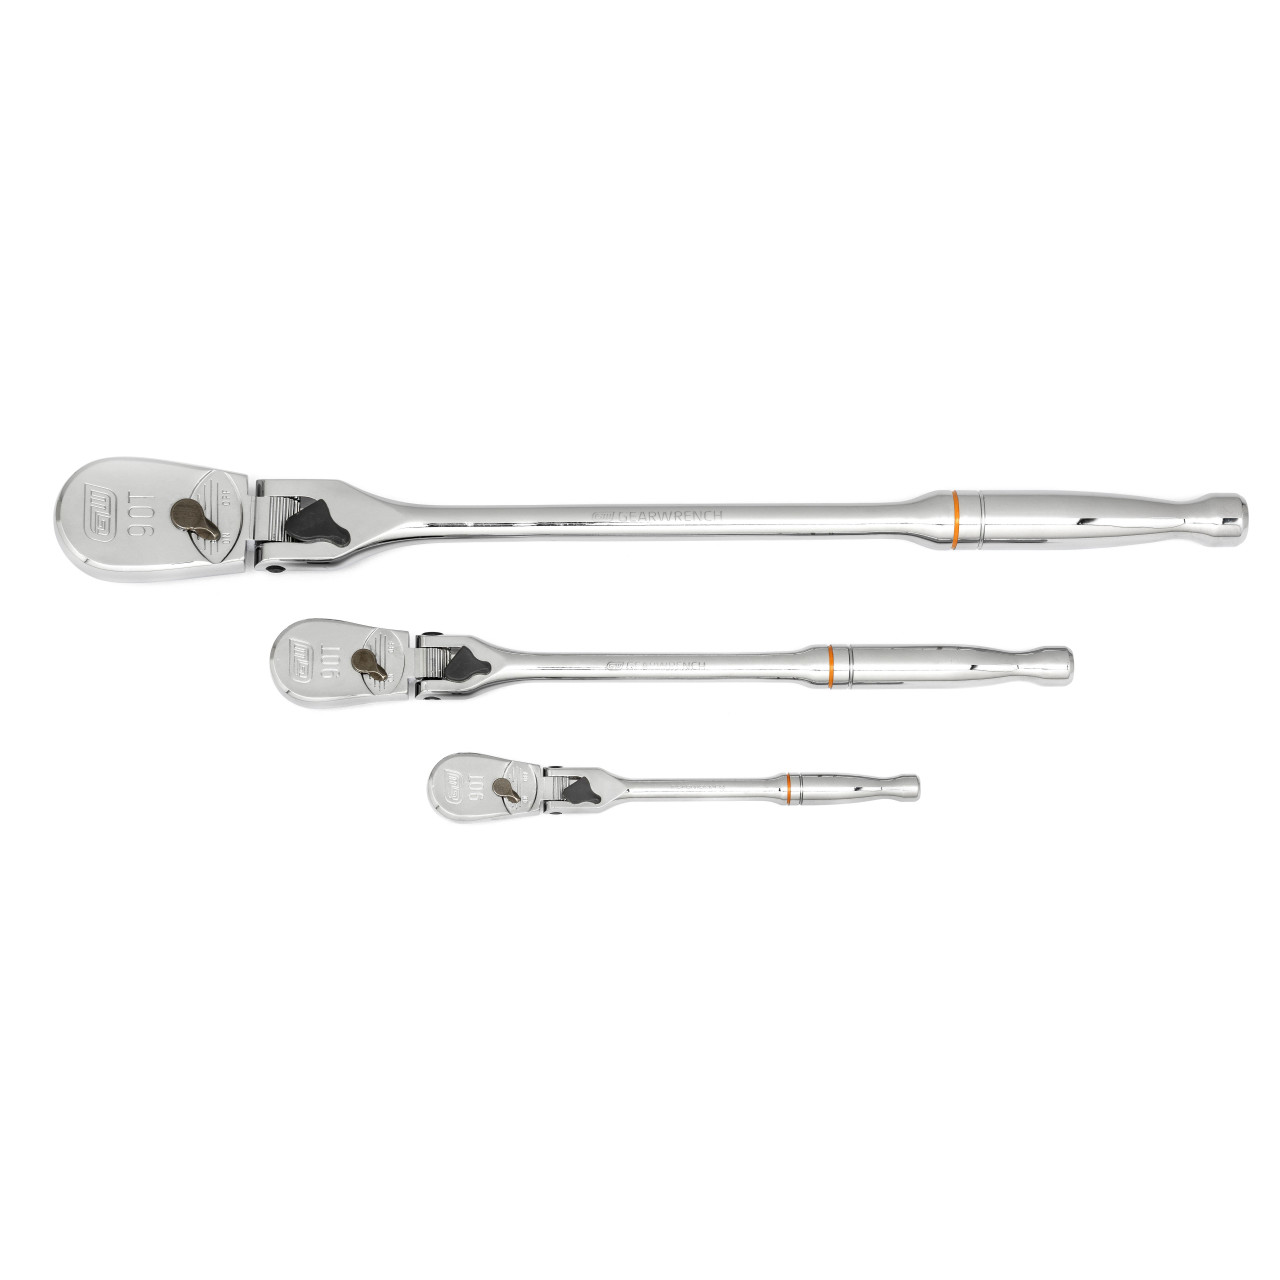 Gearwrench ratchet set 81276T